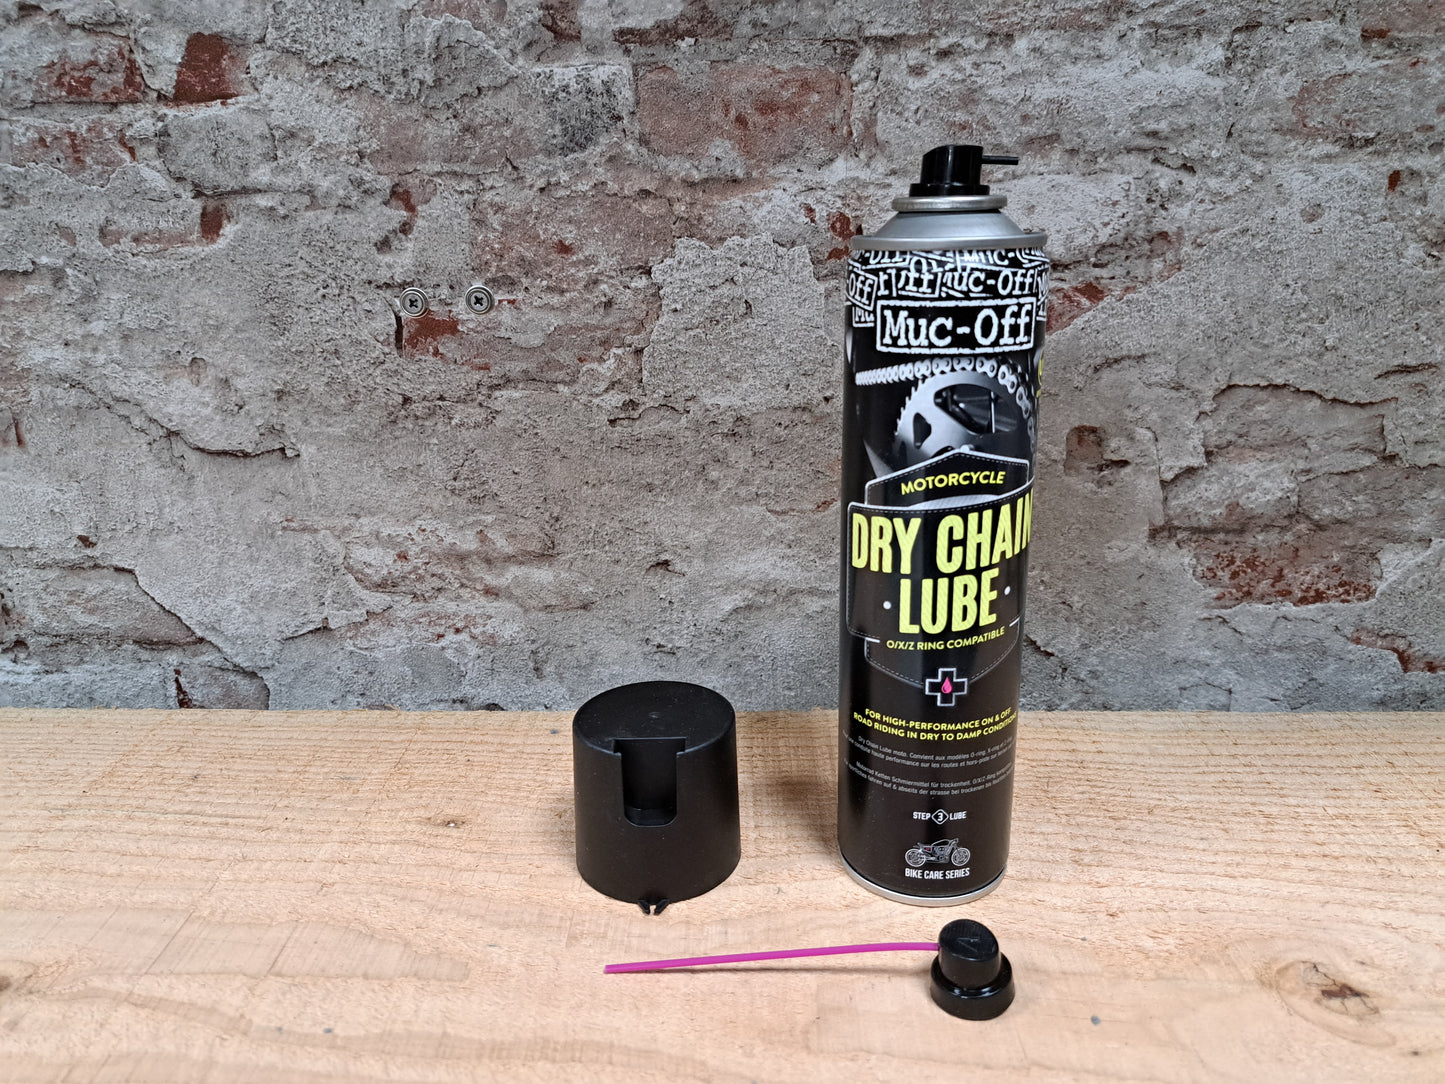 Muc-Off Motorcycle Dry Chain Lube